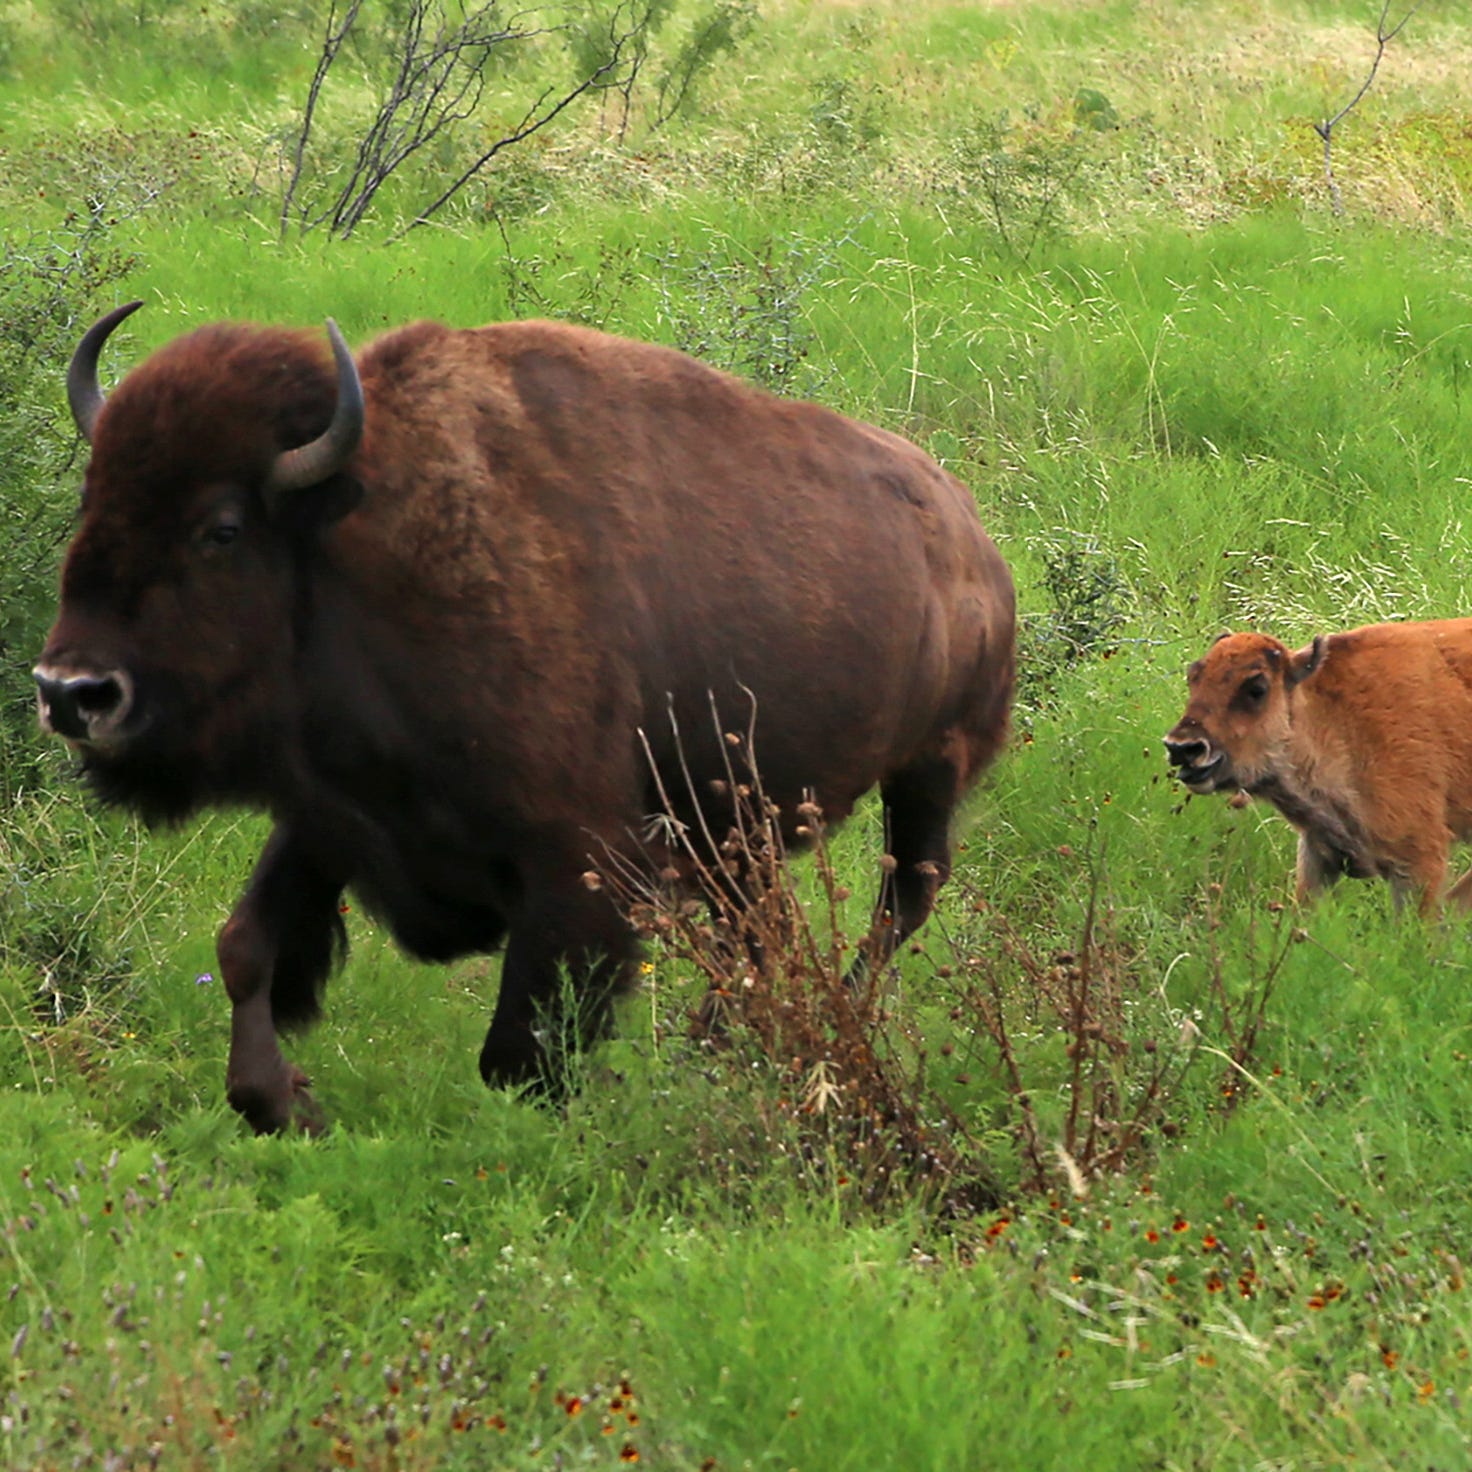 A young bison follows a mature adult during feeding time at San Angelo State Park on Thursday.